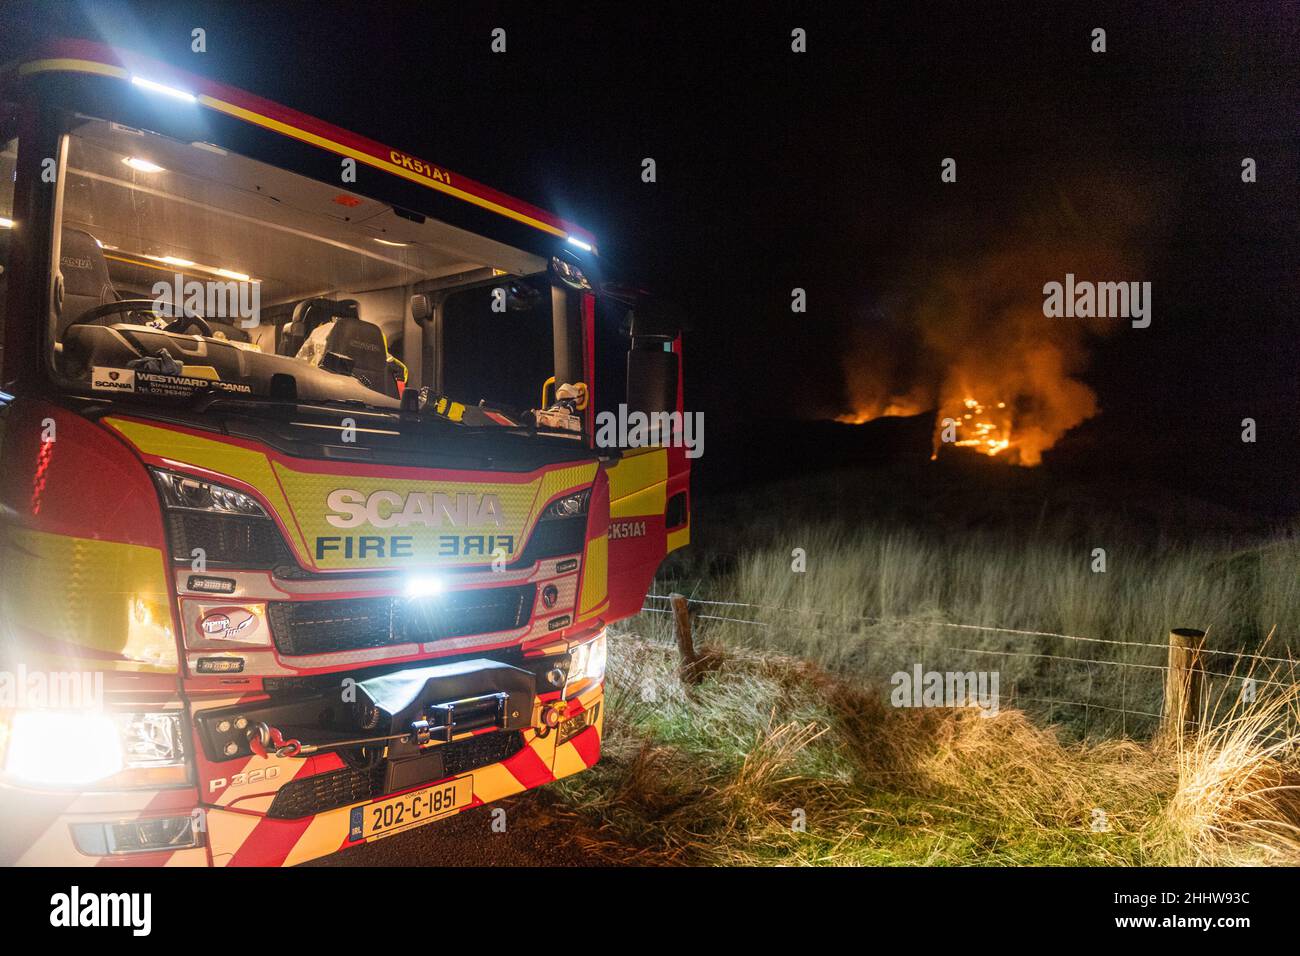 Sparrograda, West Cork, Ireland. 25th Jan, 2022. Four units of the Cork County Fire Brigade were called out to a large gorse fire last night at Sparrograda, between Ballydehob and Bantry. At its height, the fire front was 1KM wide but was extinguished at around midnight. Credit: AG News/Alamy Live News Stock Photo